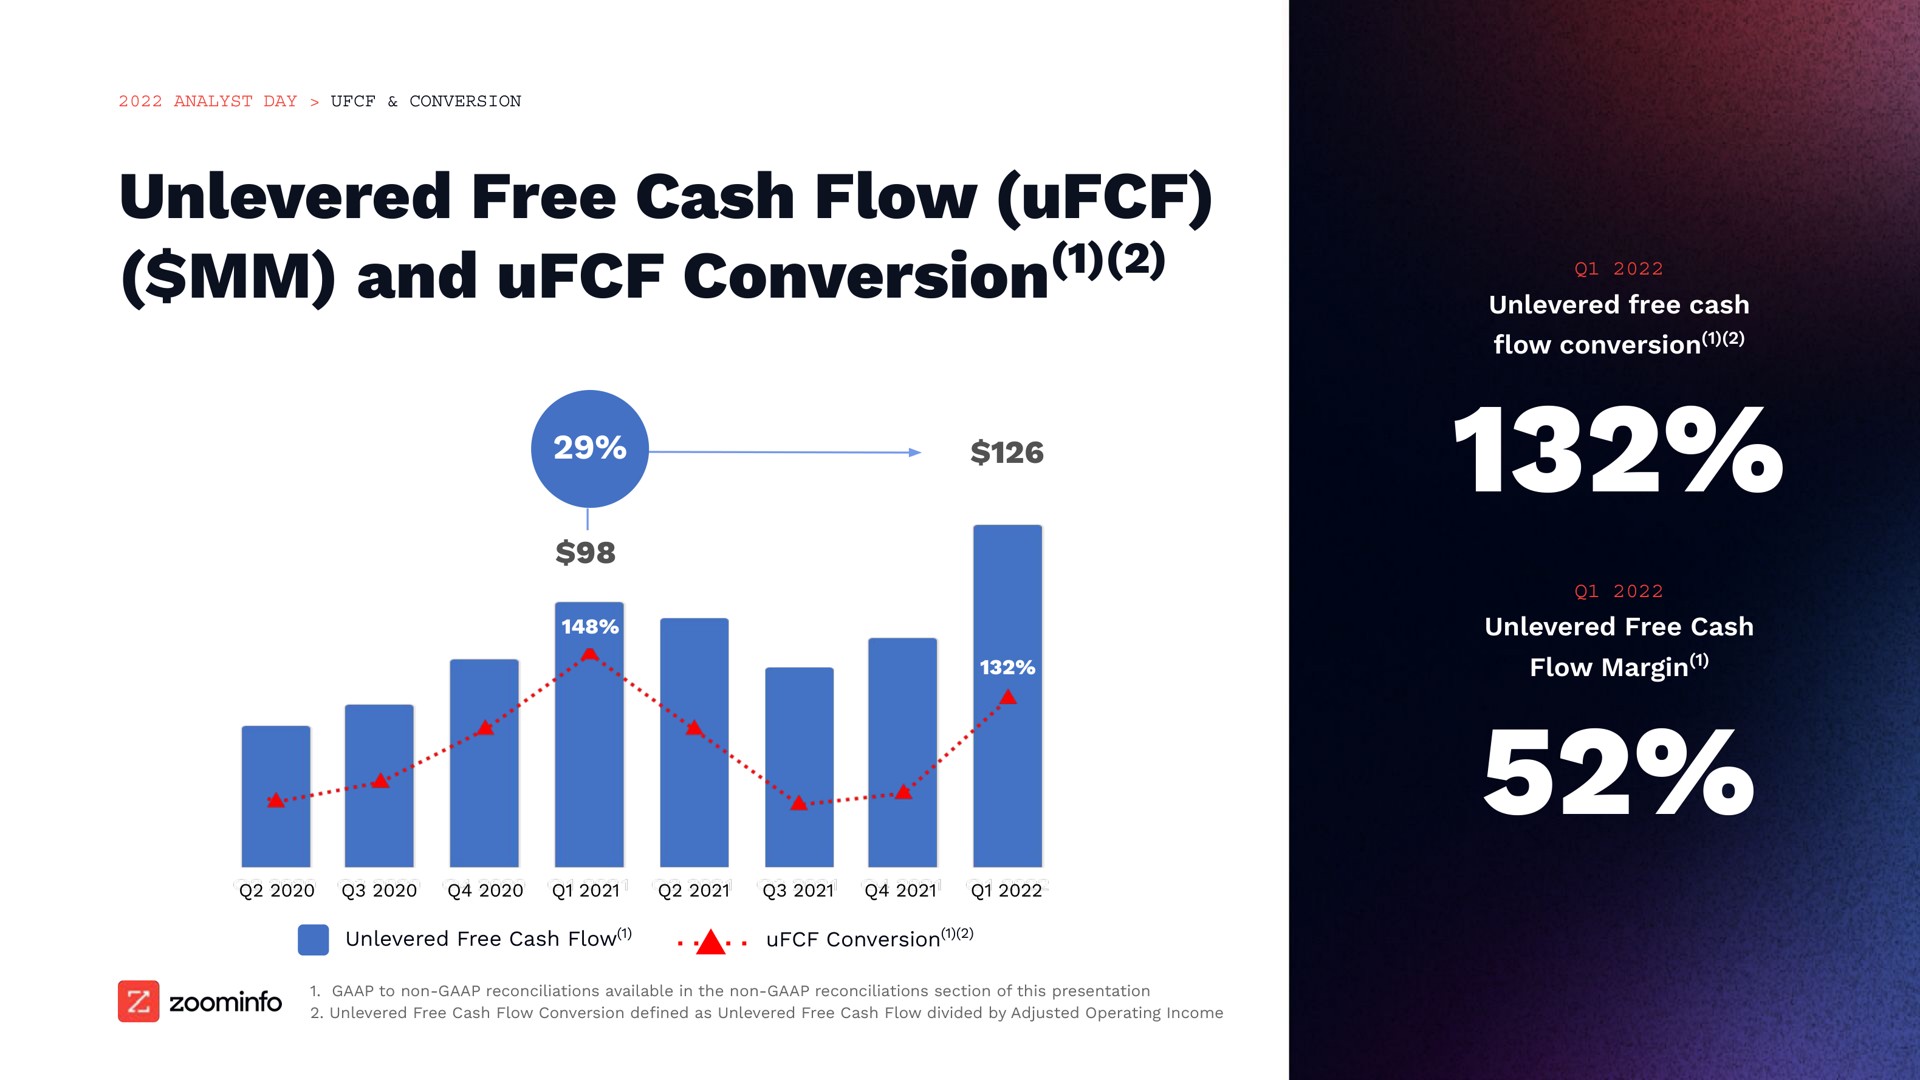 free cash flow and conversion | Zoominfo